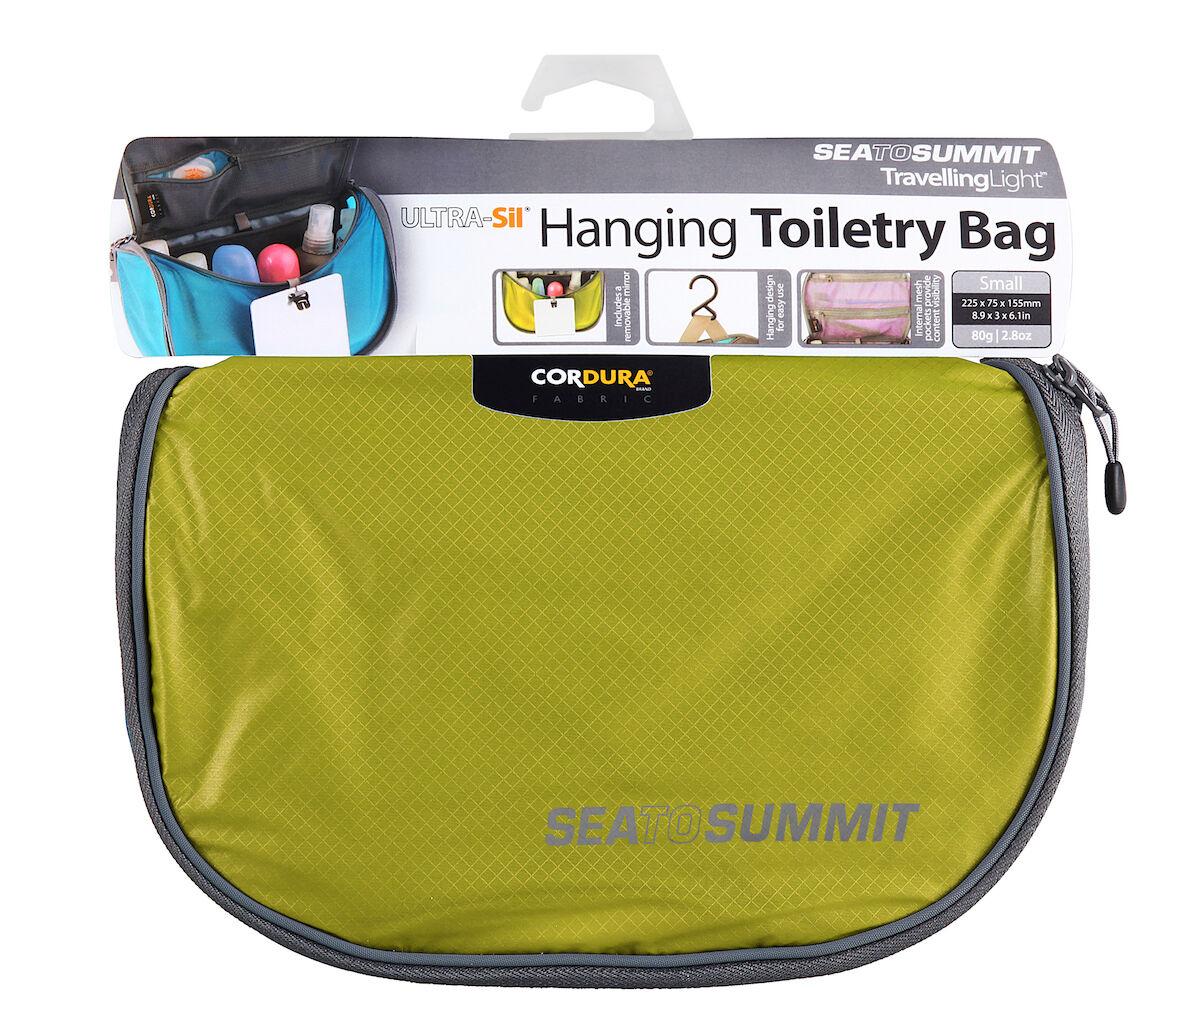 Sea To Summit - Hanging Toiletry Bag - Neceseres